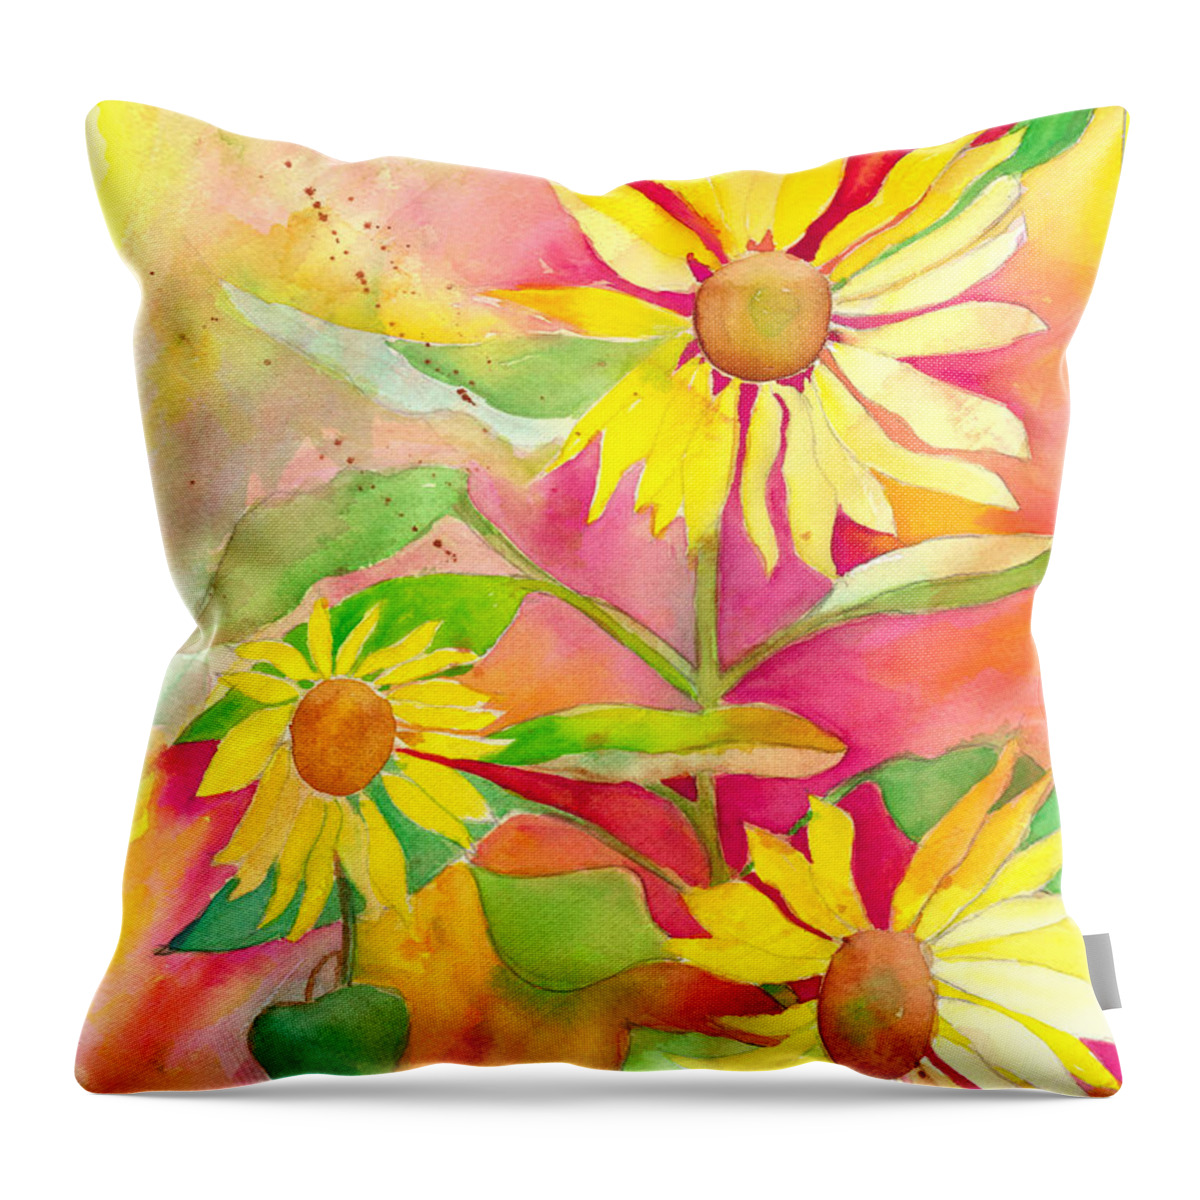 Watercolor Painting Throw Pillow featuring the painting Sunflower by Kelly Perez